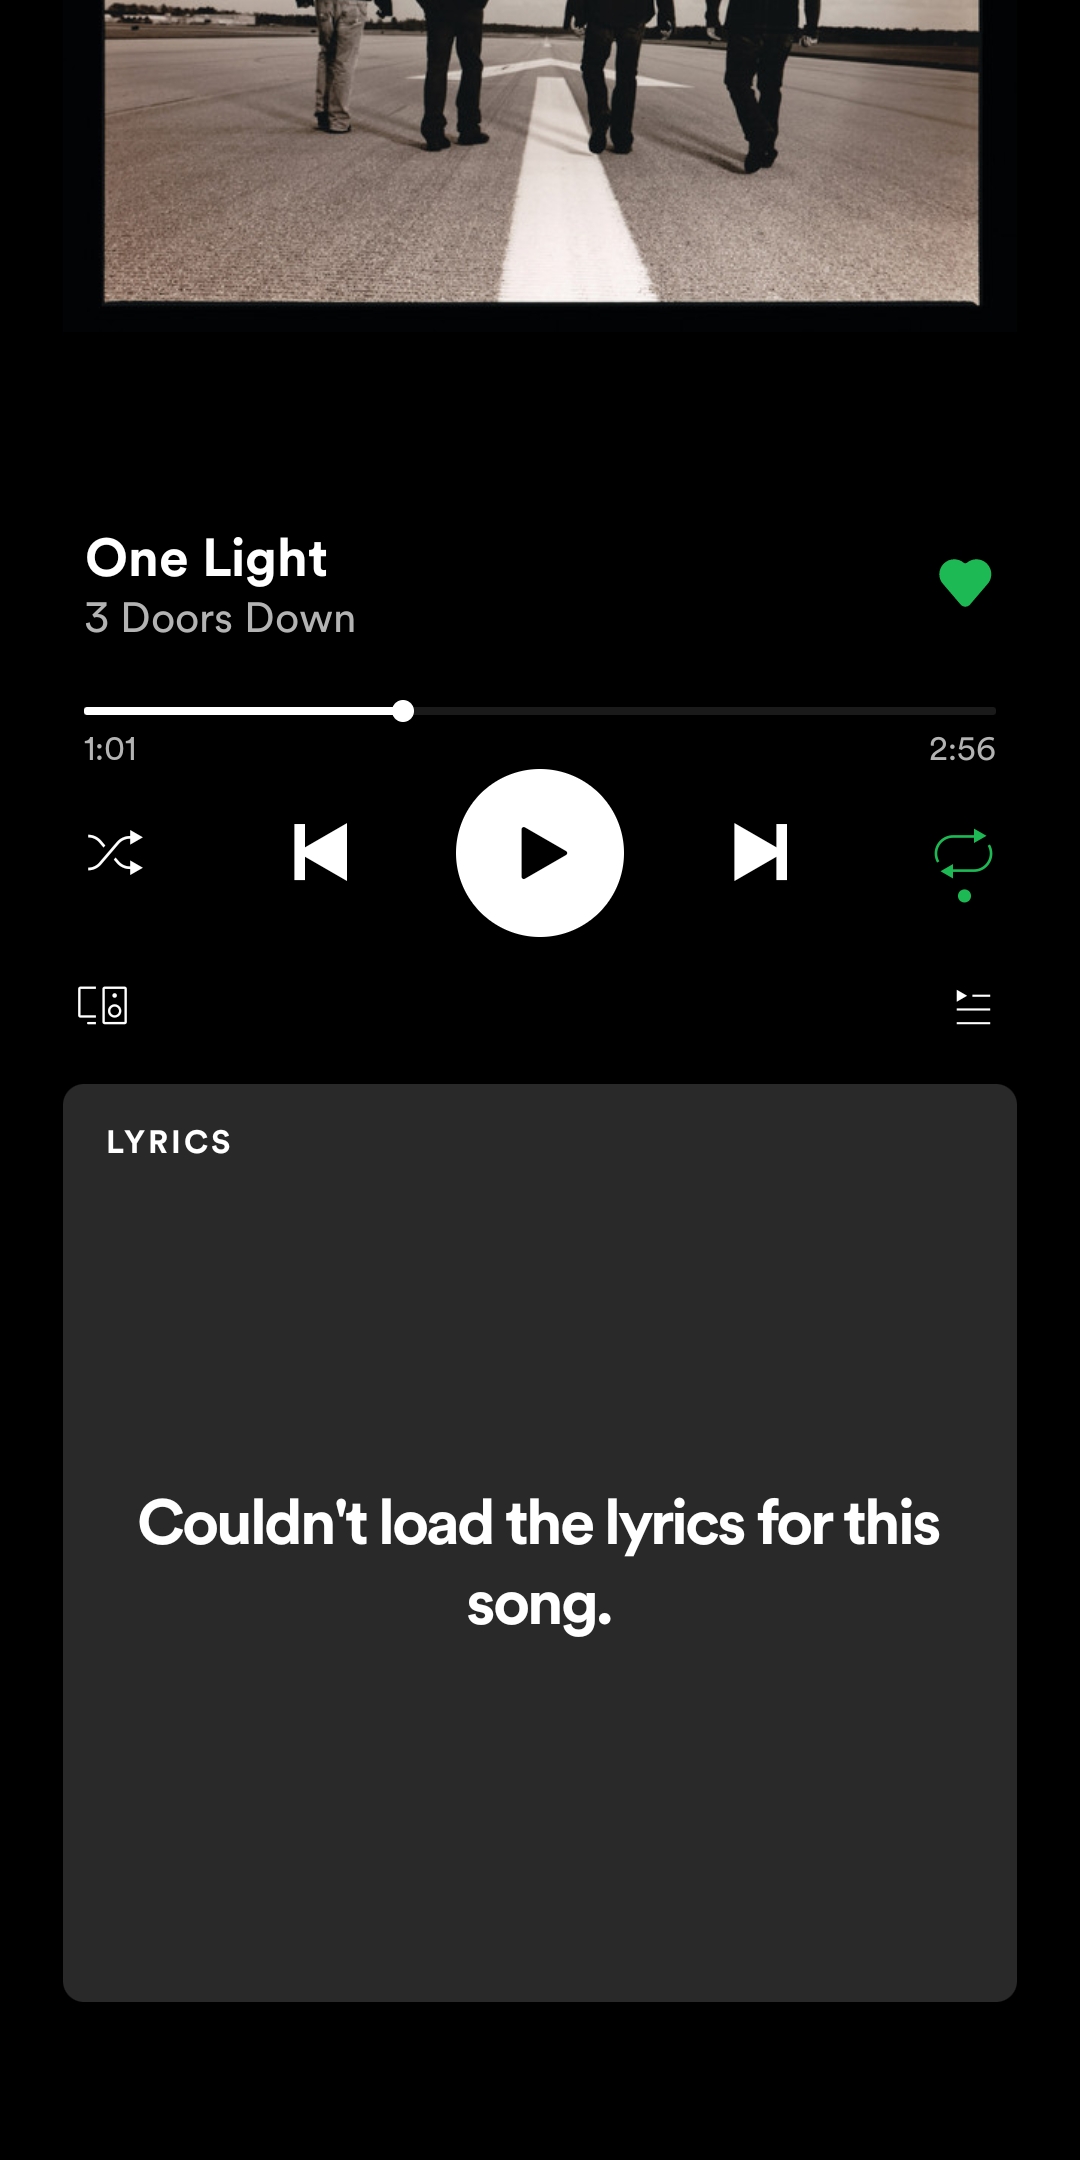 when opening lyrics the app is force closed · Issue #1113